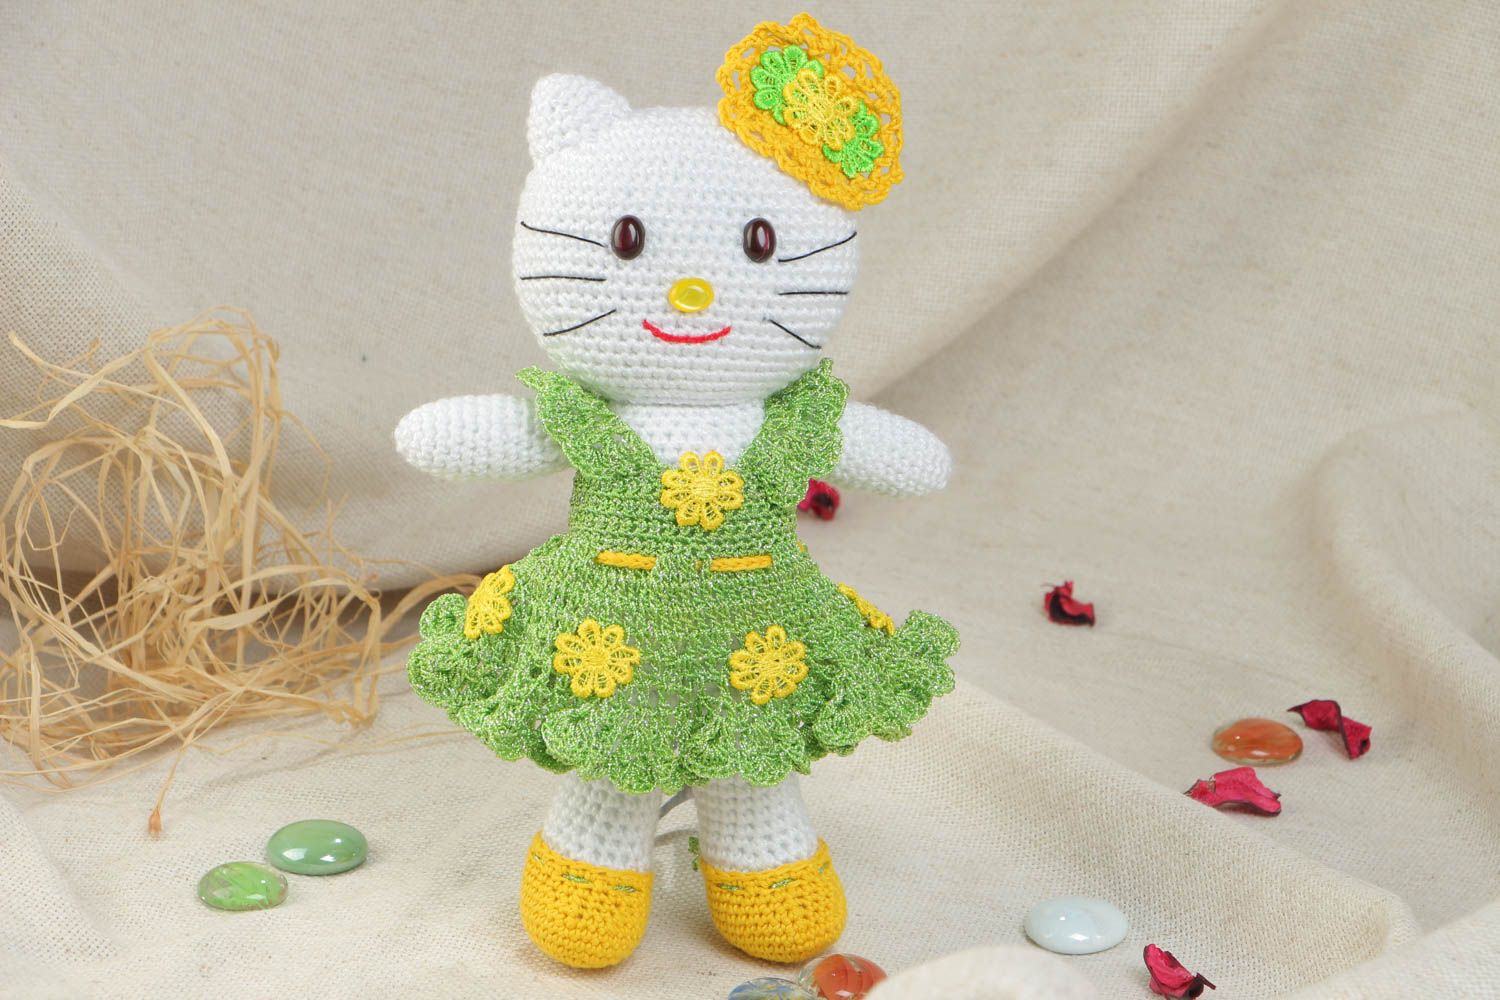 Soft handmade decorative crocheted toy cat in a green dress made of acrylic threads photo 1